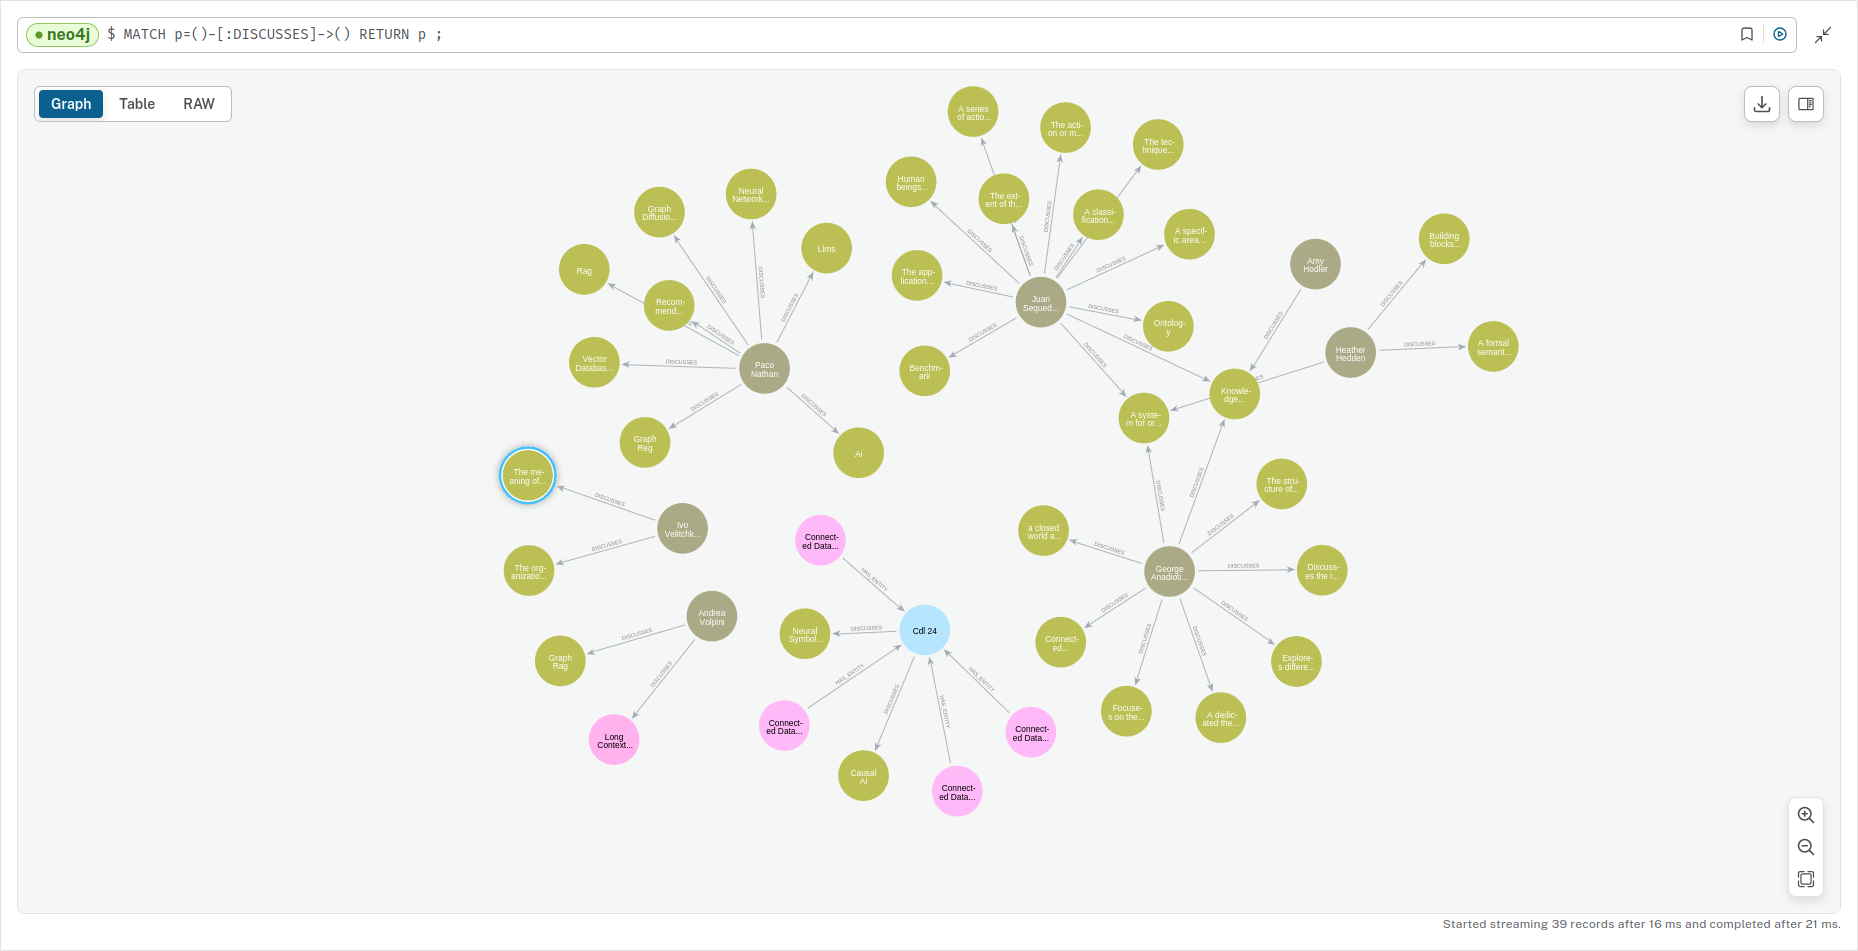 A partial visualization of the auto-generated Knowledge Graph created from the Connected Data roundtable